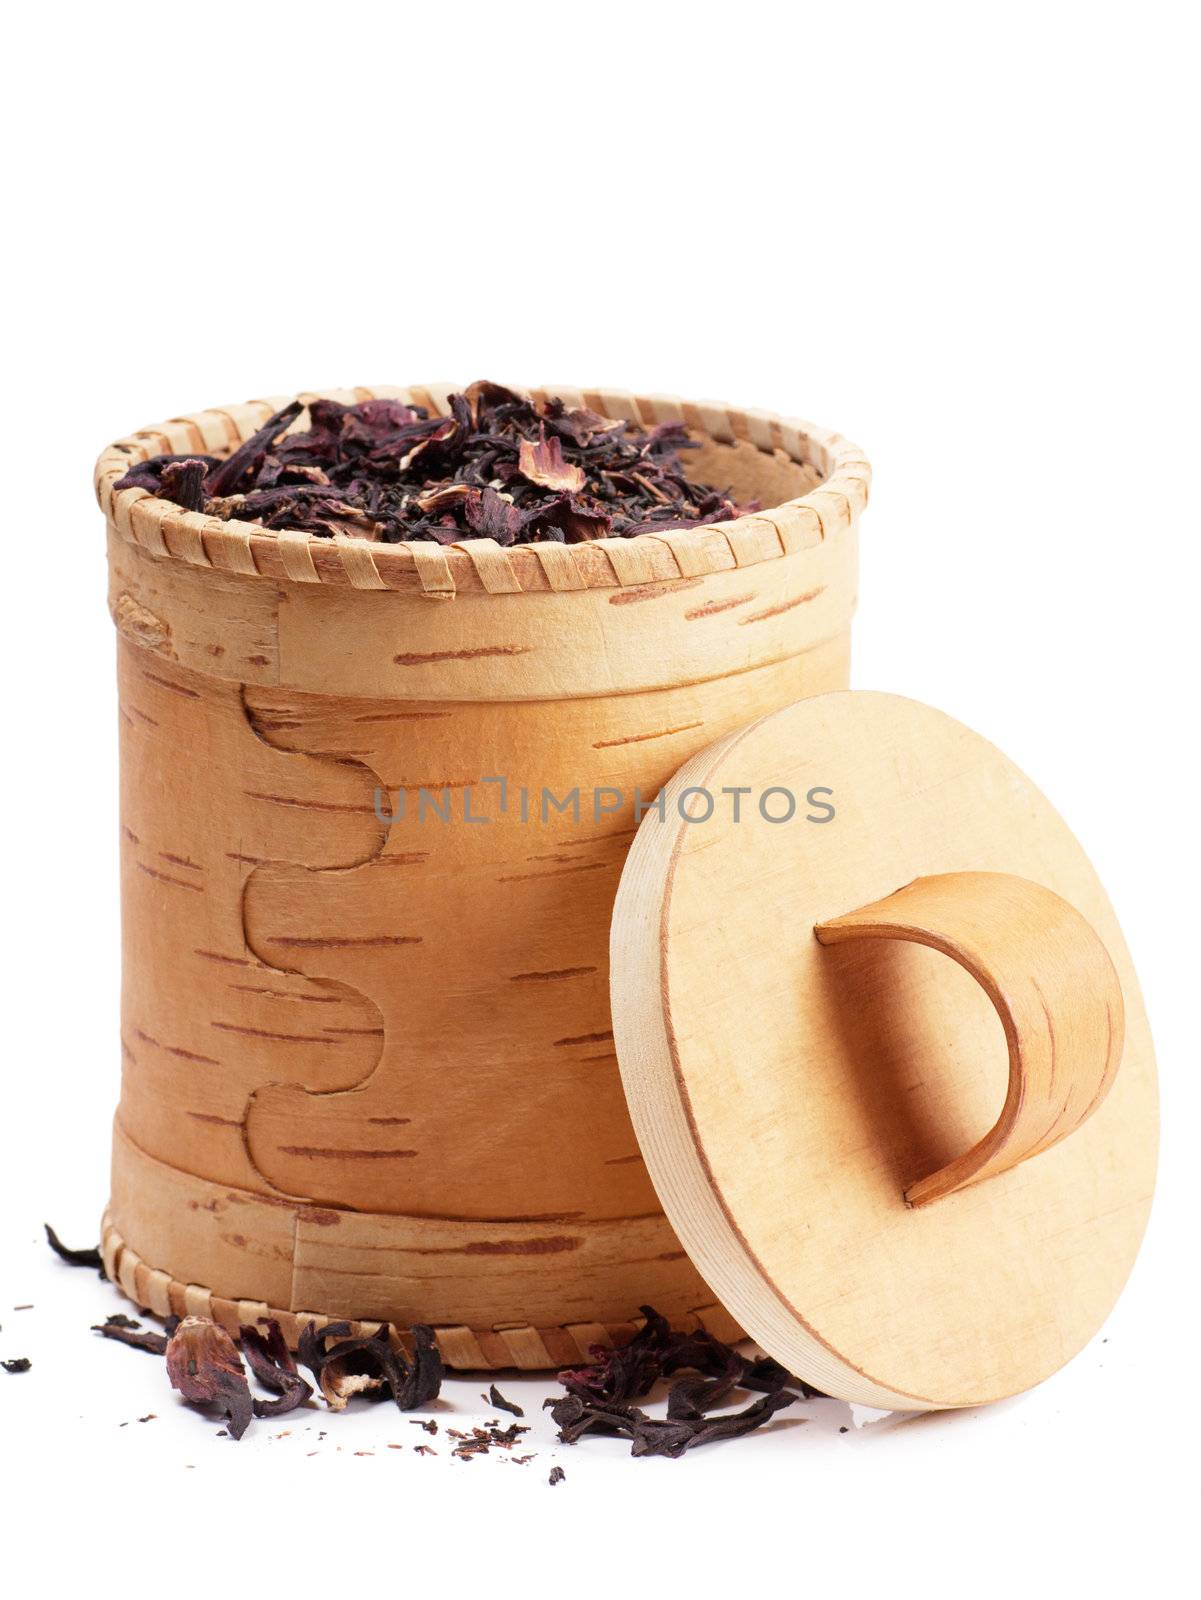 Birch bark box with red tea inside over white background